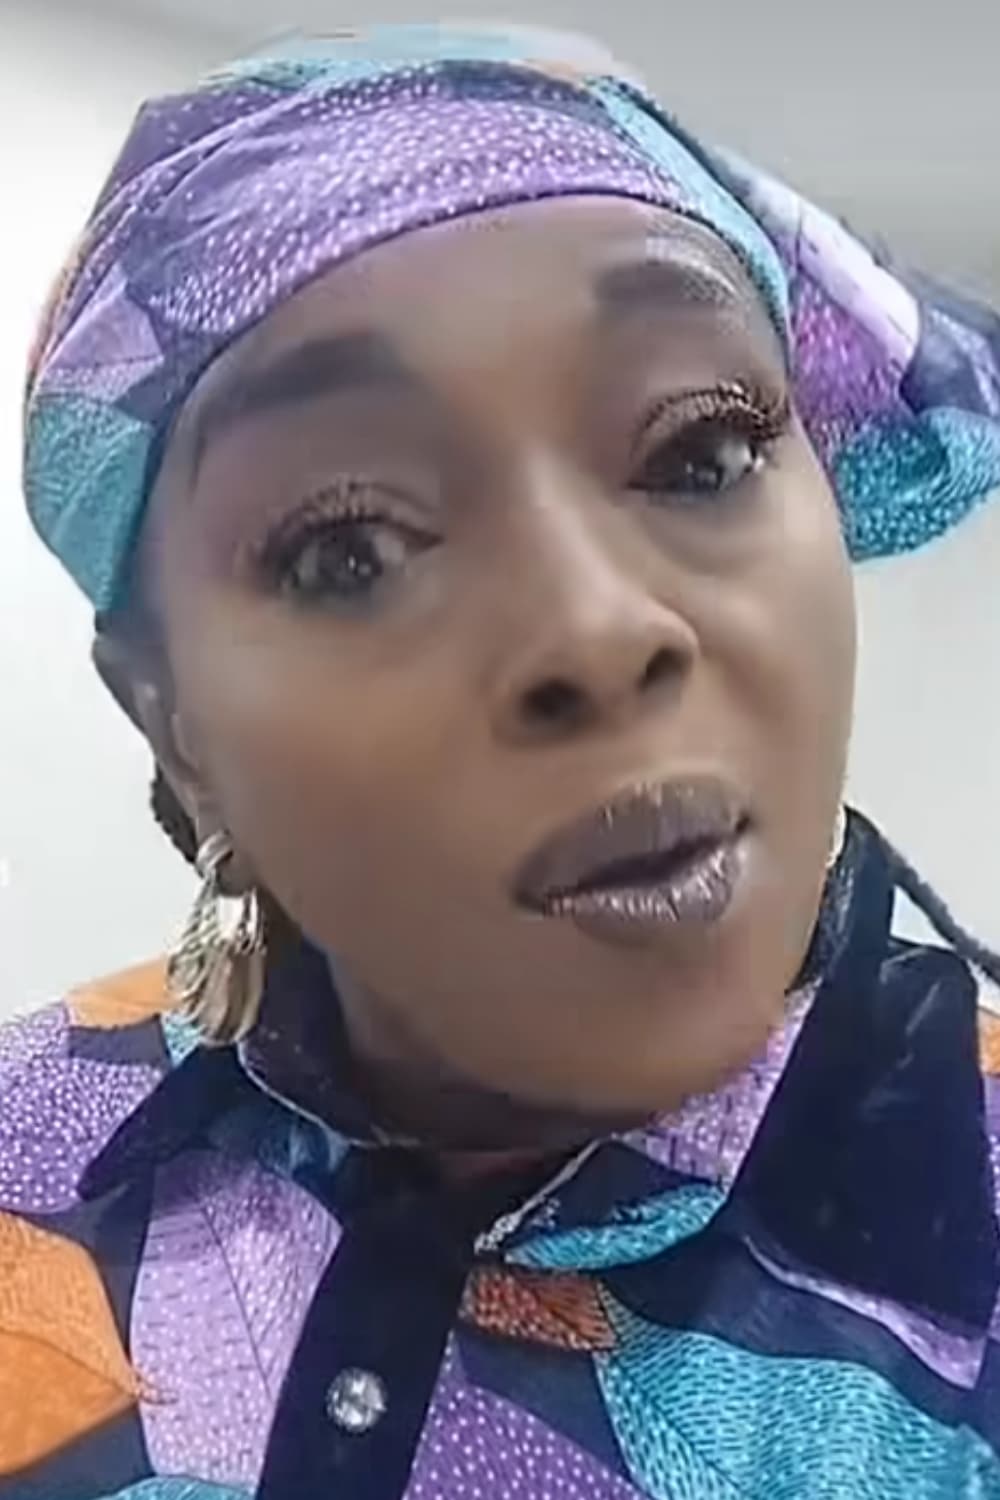 Rita Edochie throws shades as she marks two months of Yul’s son’s demise